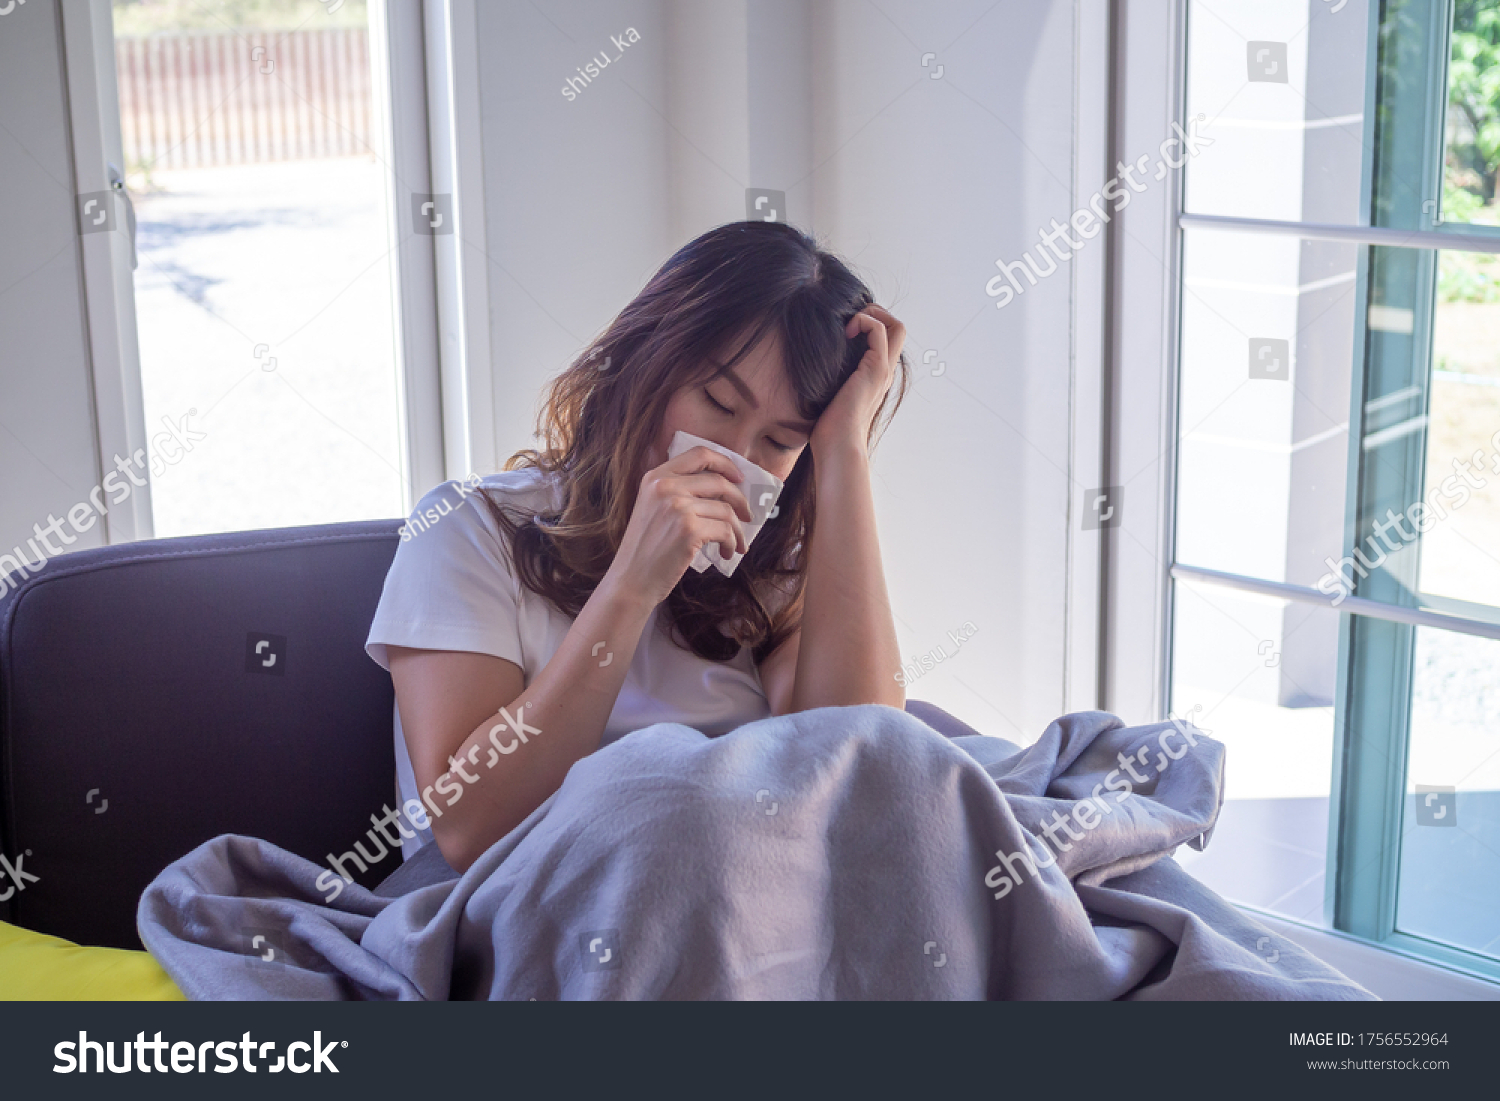 An Asian woman sick on the sofa in the house. Women have headaches, high fever and runny nose due to flu. The concept of illness with influenza #1756552964